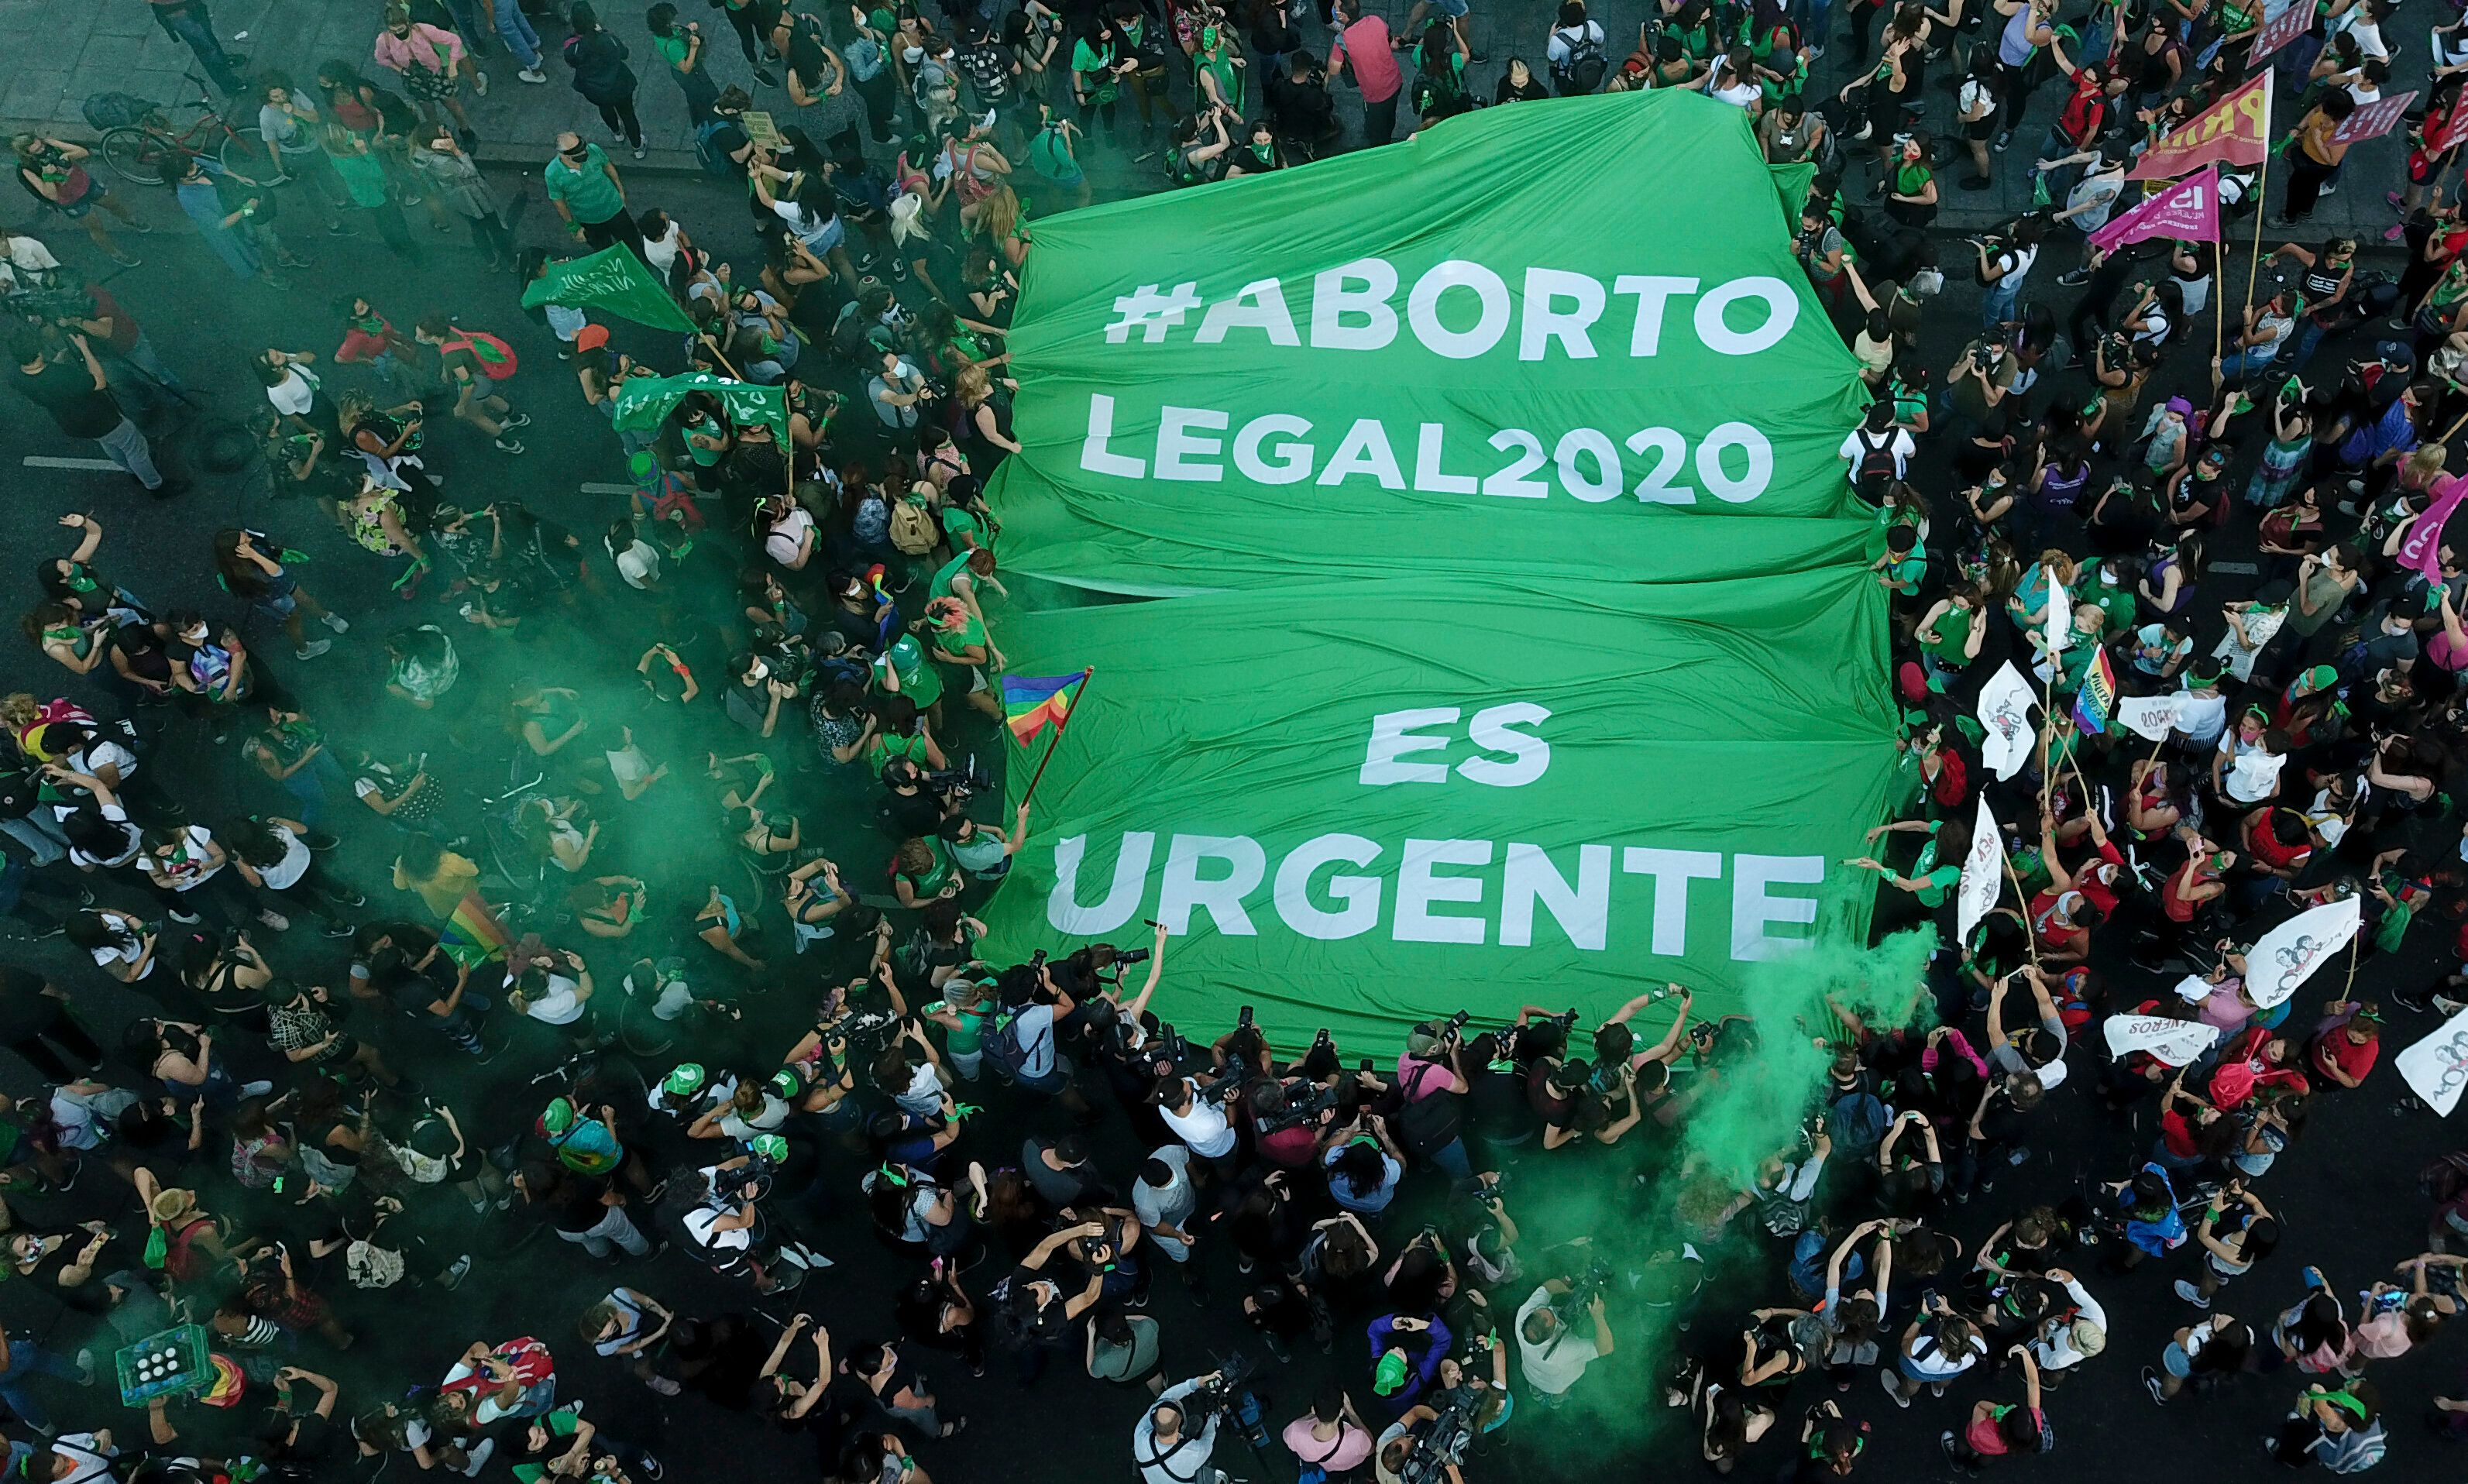 Abortion-rights activists in Argentina demonstrate in favor of decriminalizing abortion with a banner that reads in Spanish "